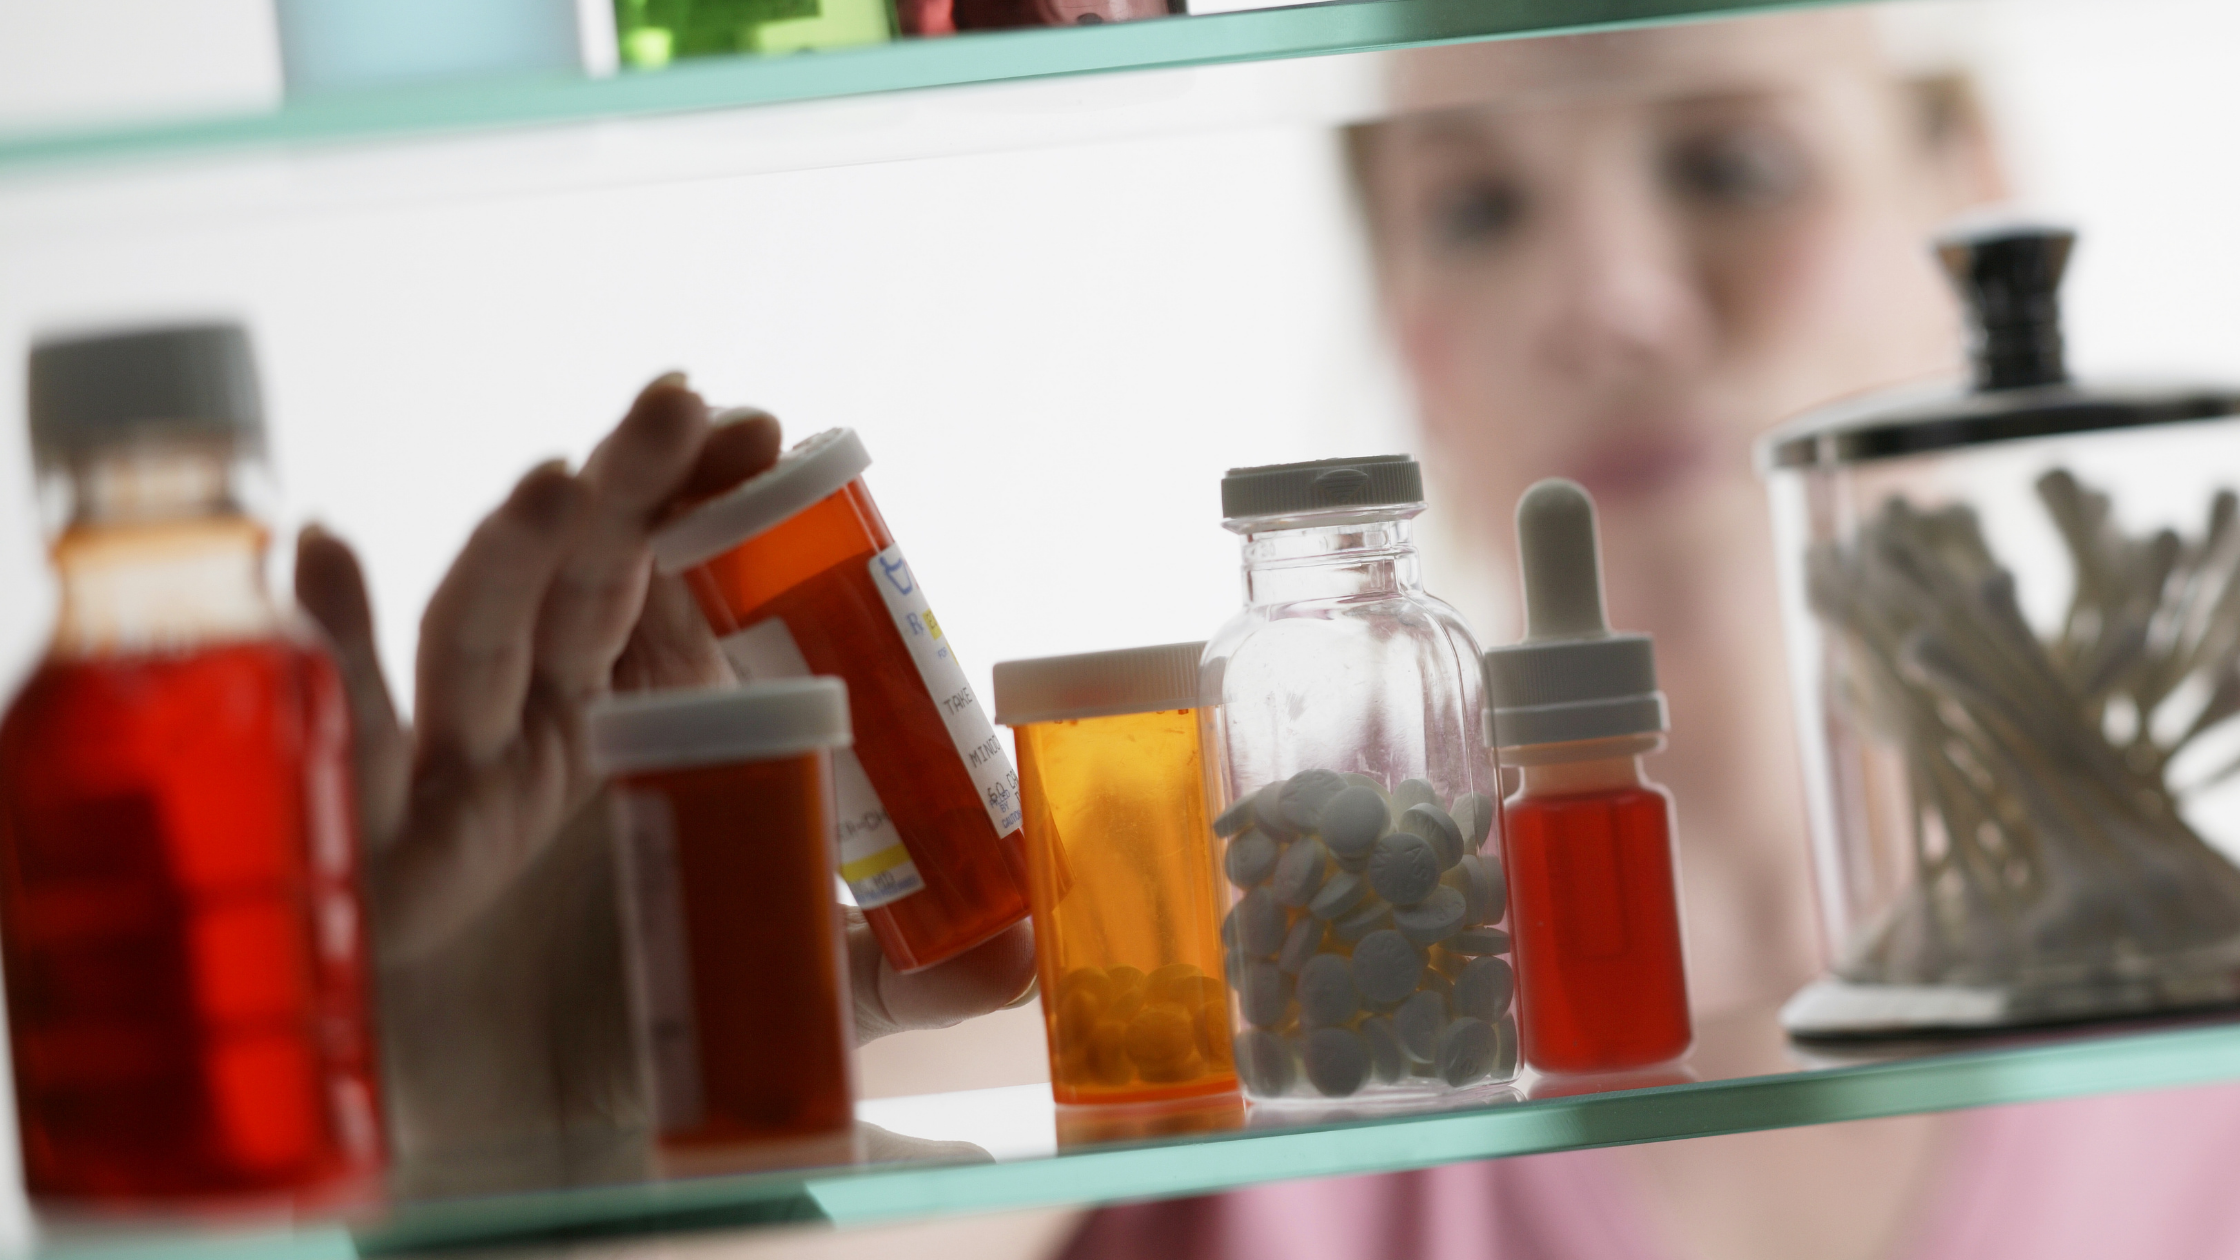 Woman considers medication bottle pulled from cabinet with many other medication bottles